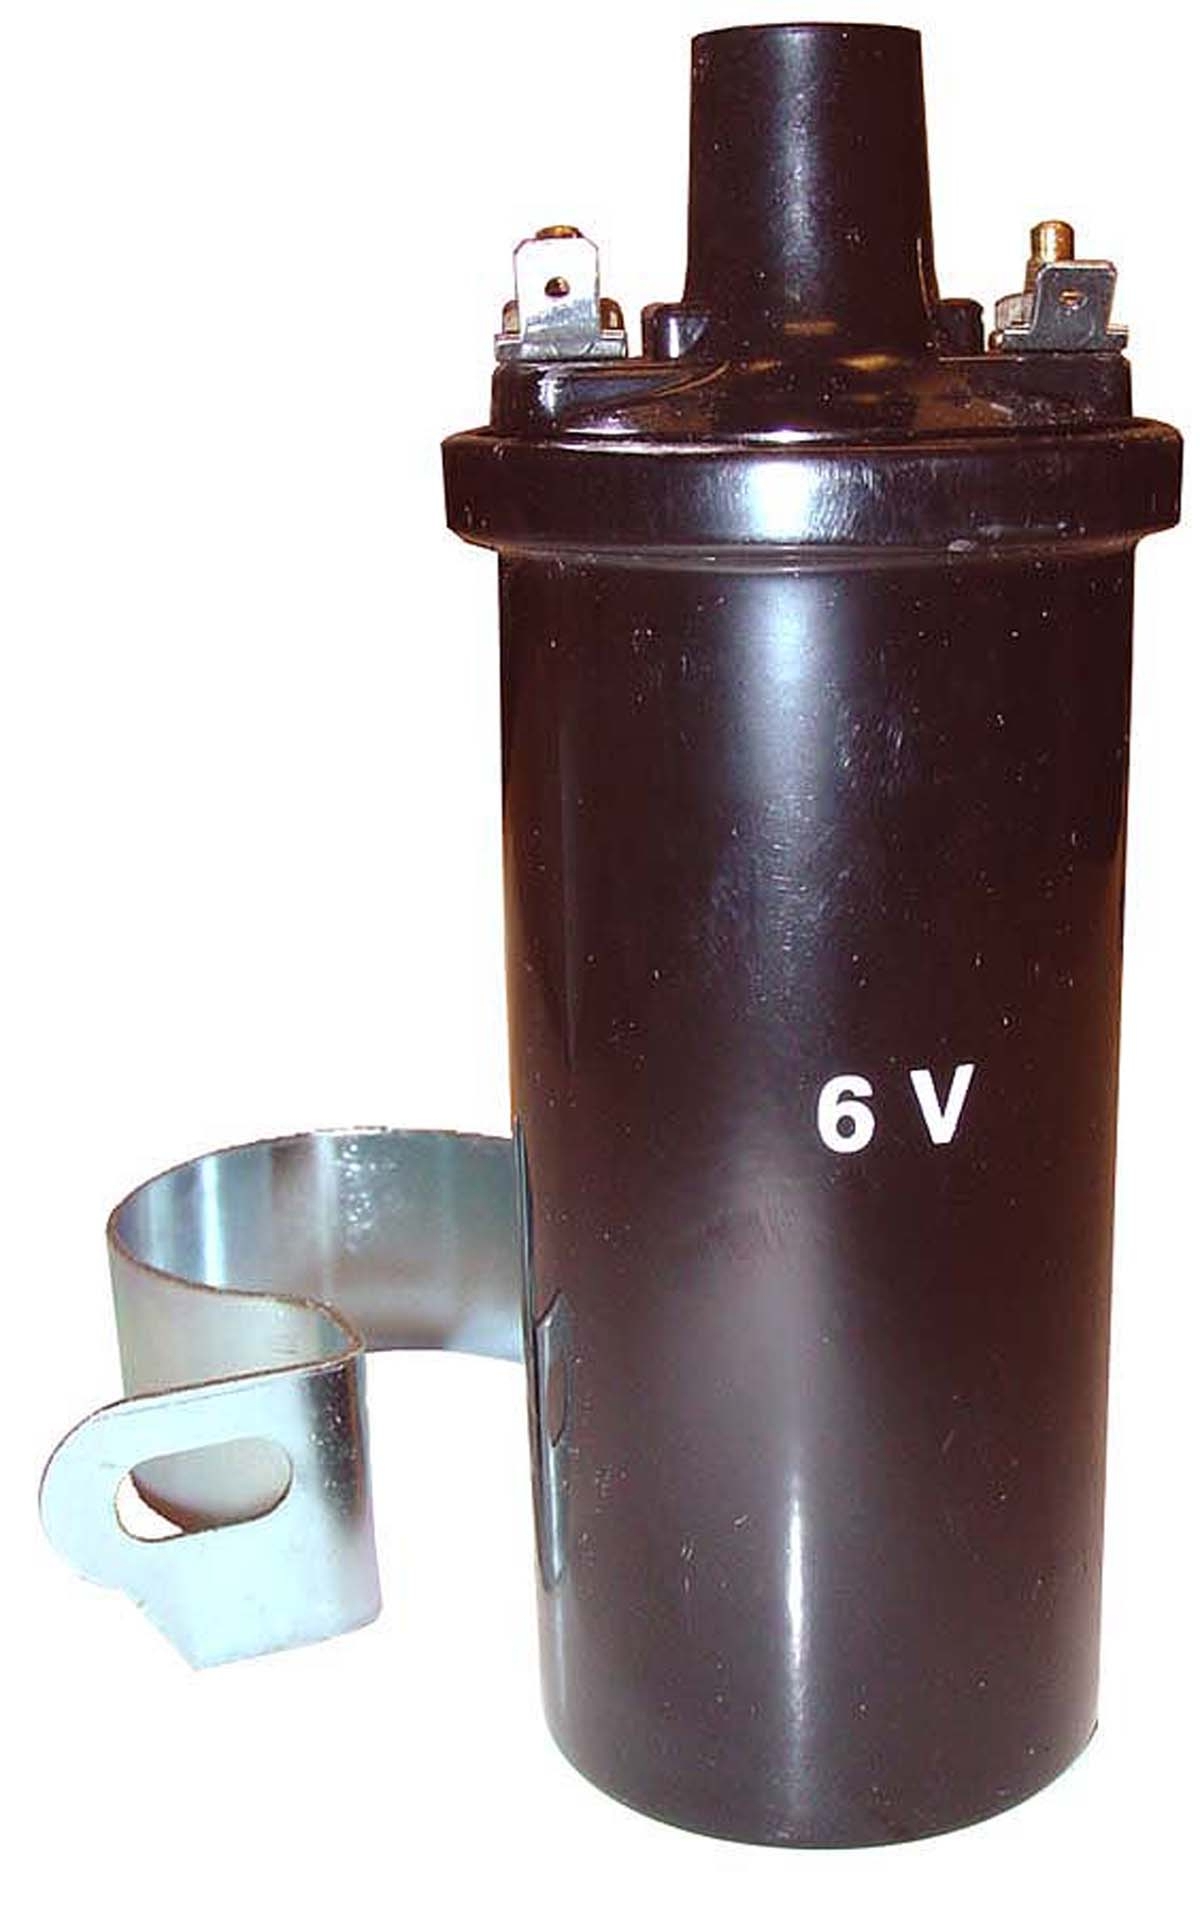 6 Volt Distributor Coil With Mounting Bracket.